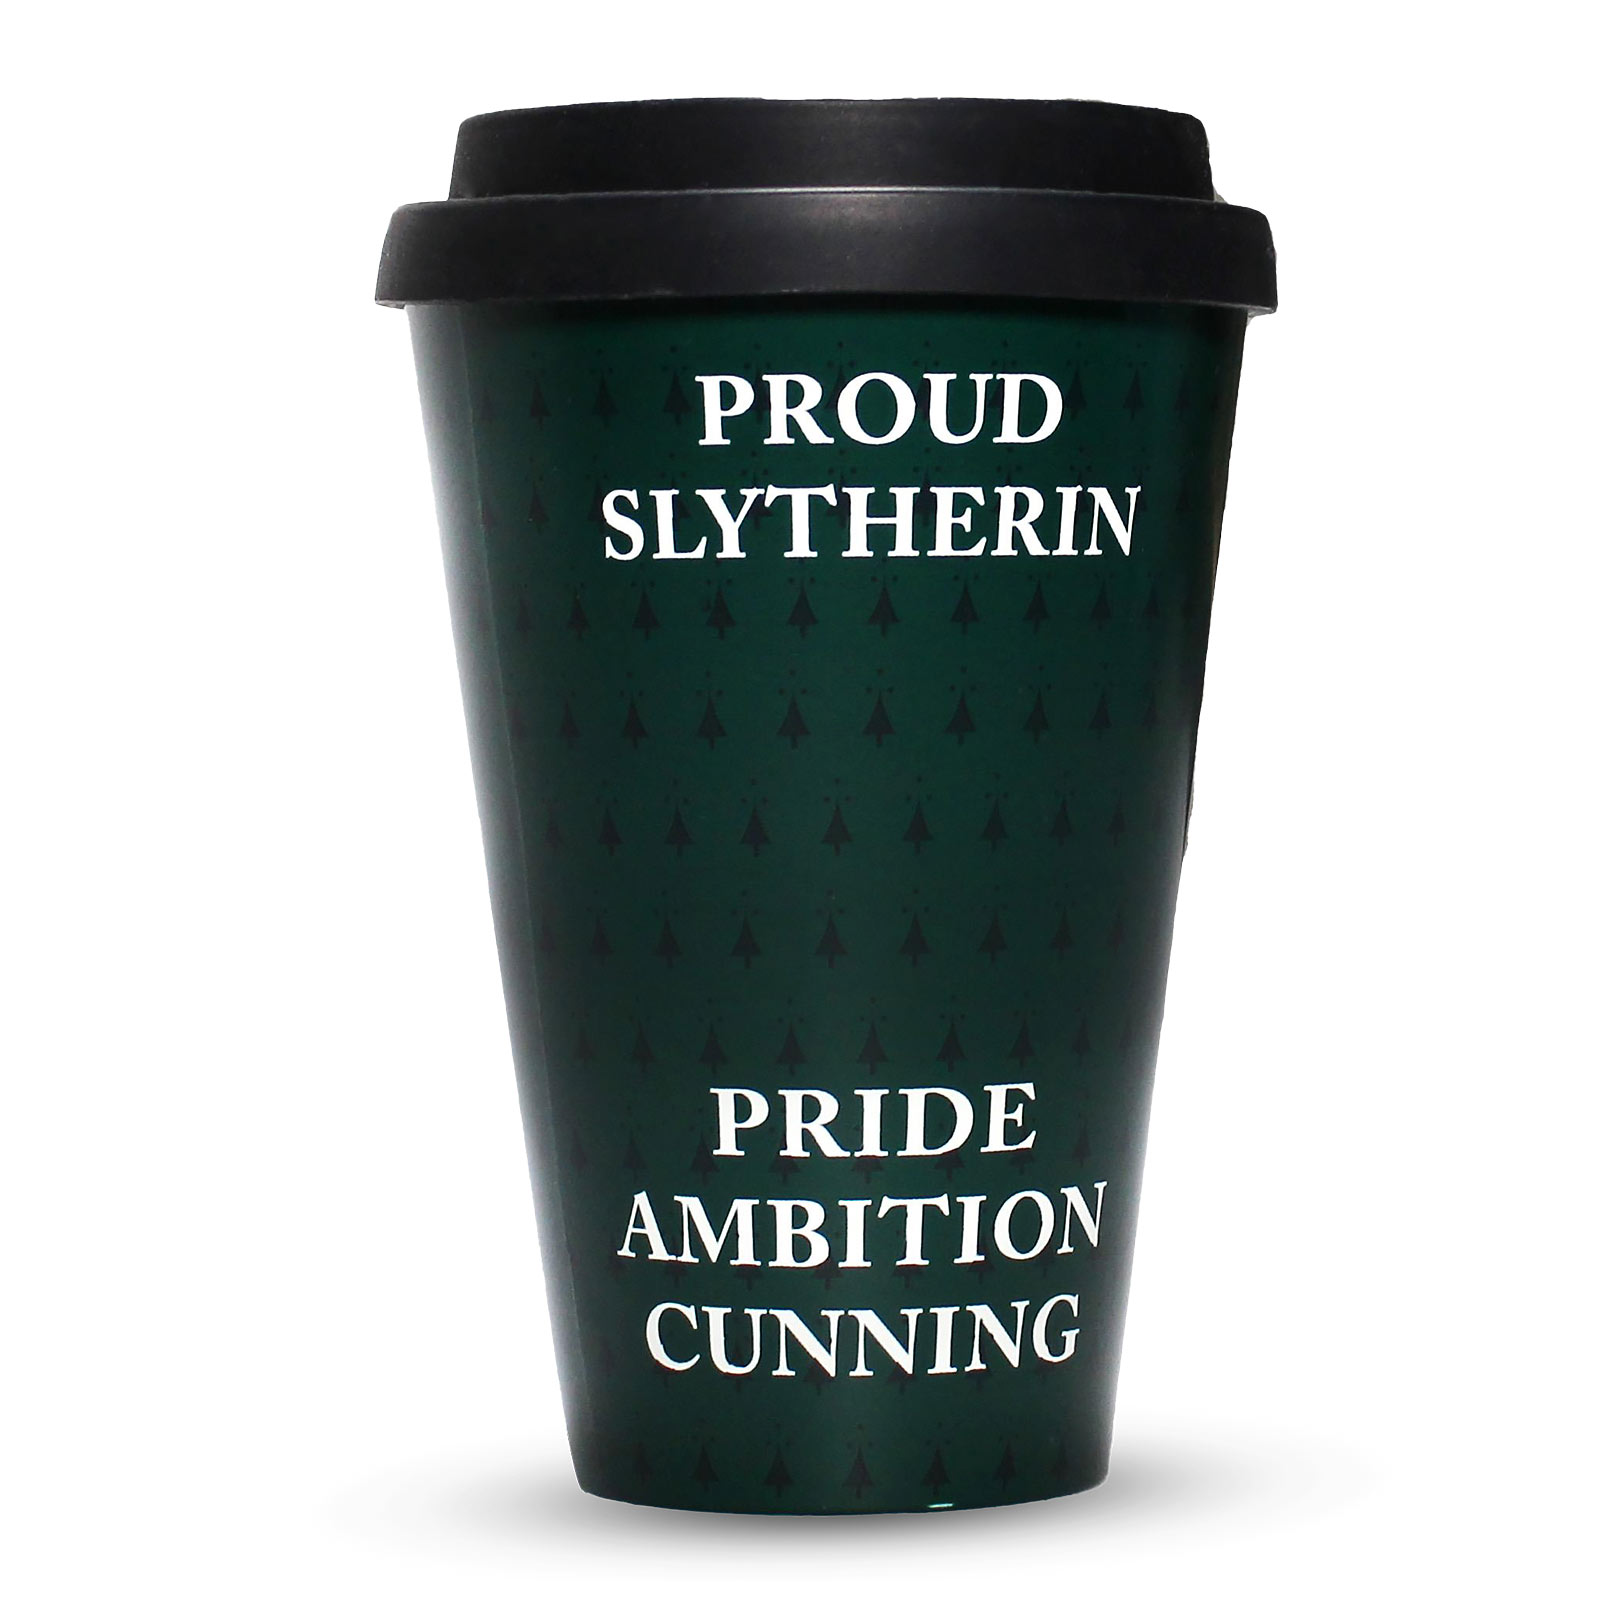 Harry Potter - Proud Slytherin To Go Cup